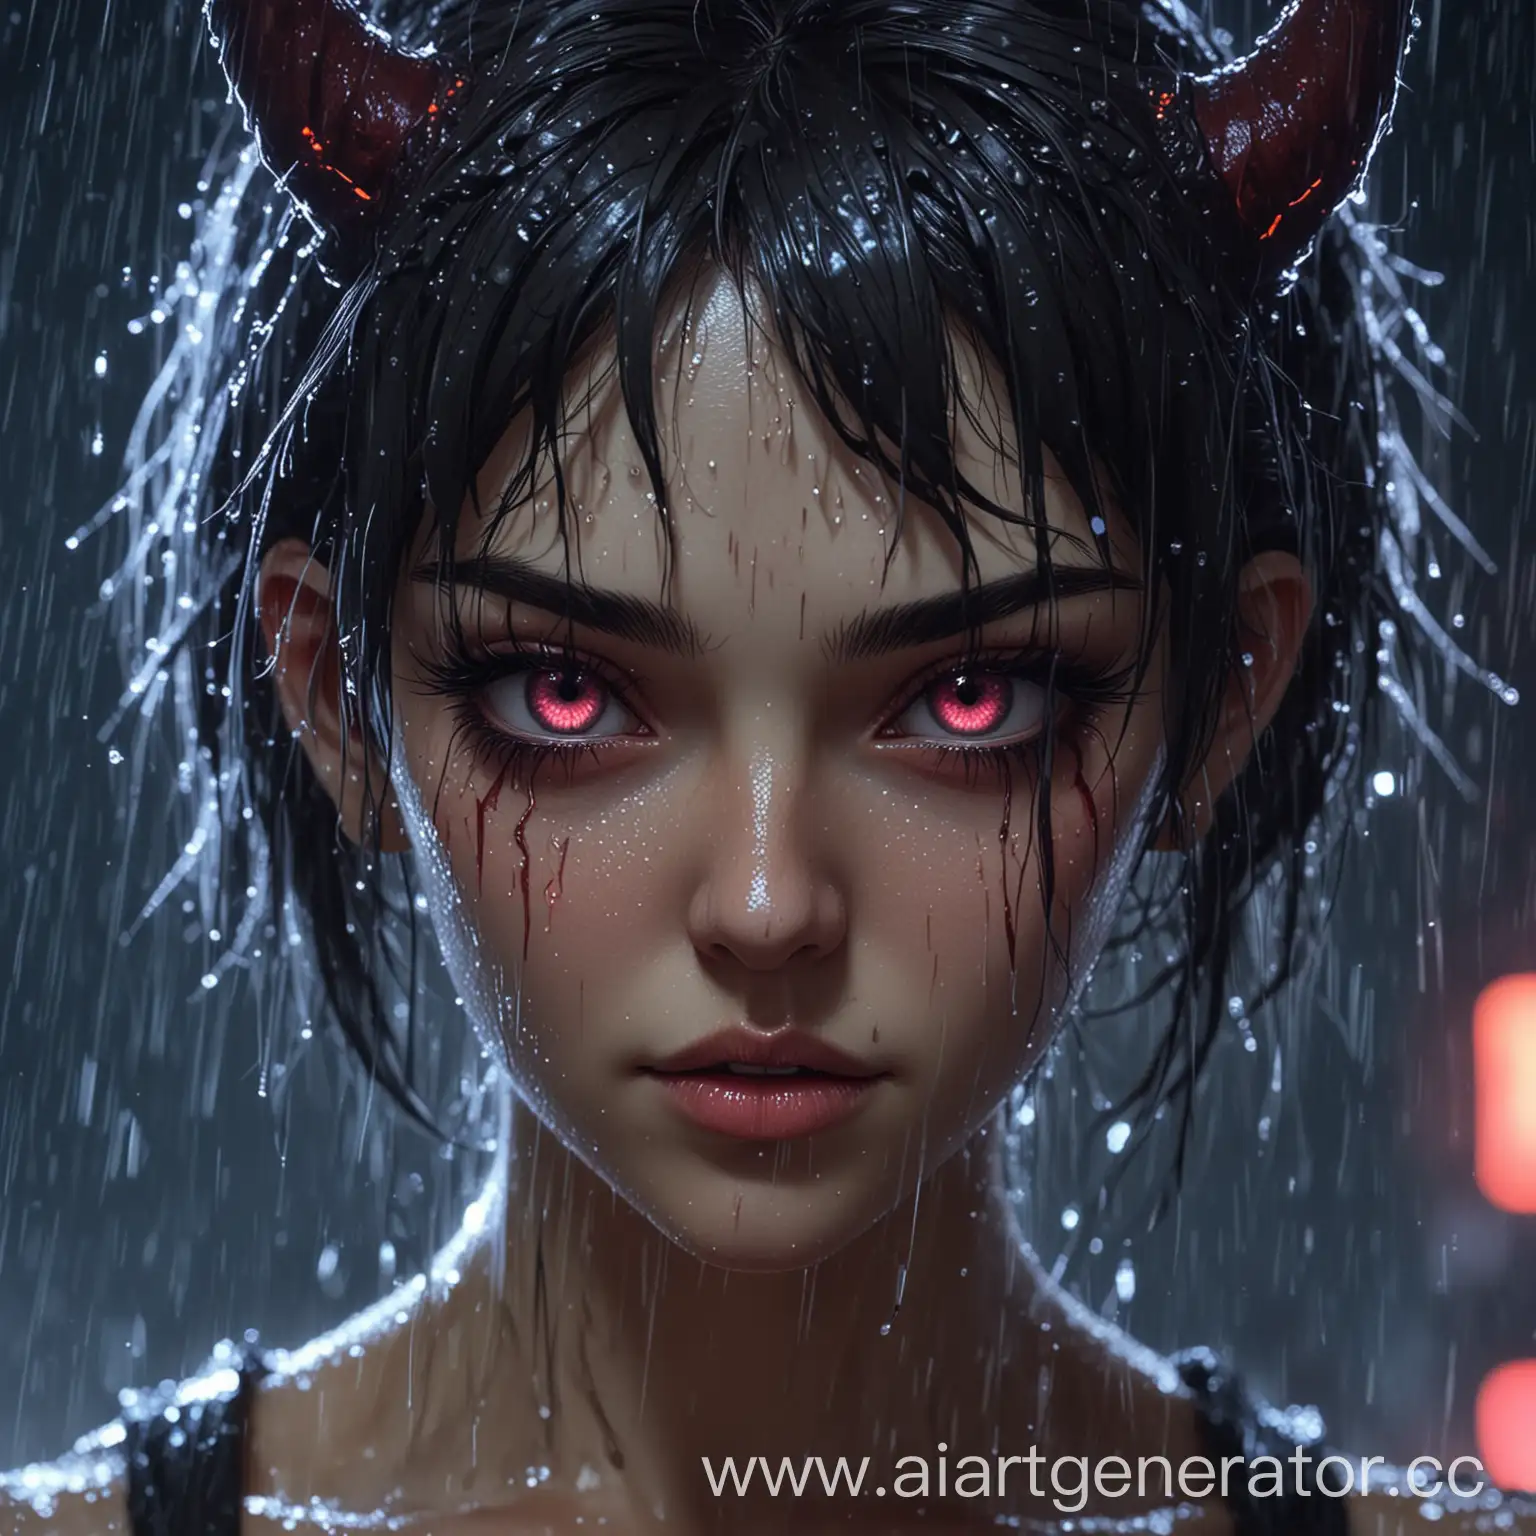 Neon-Anime-Demoness-with-Enchanting-Eyes-in-Rainy-Night